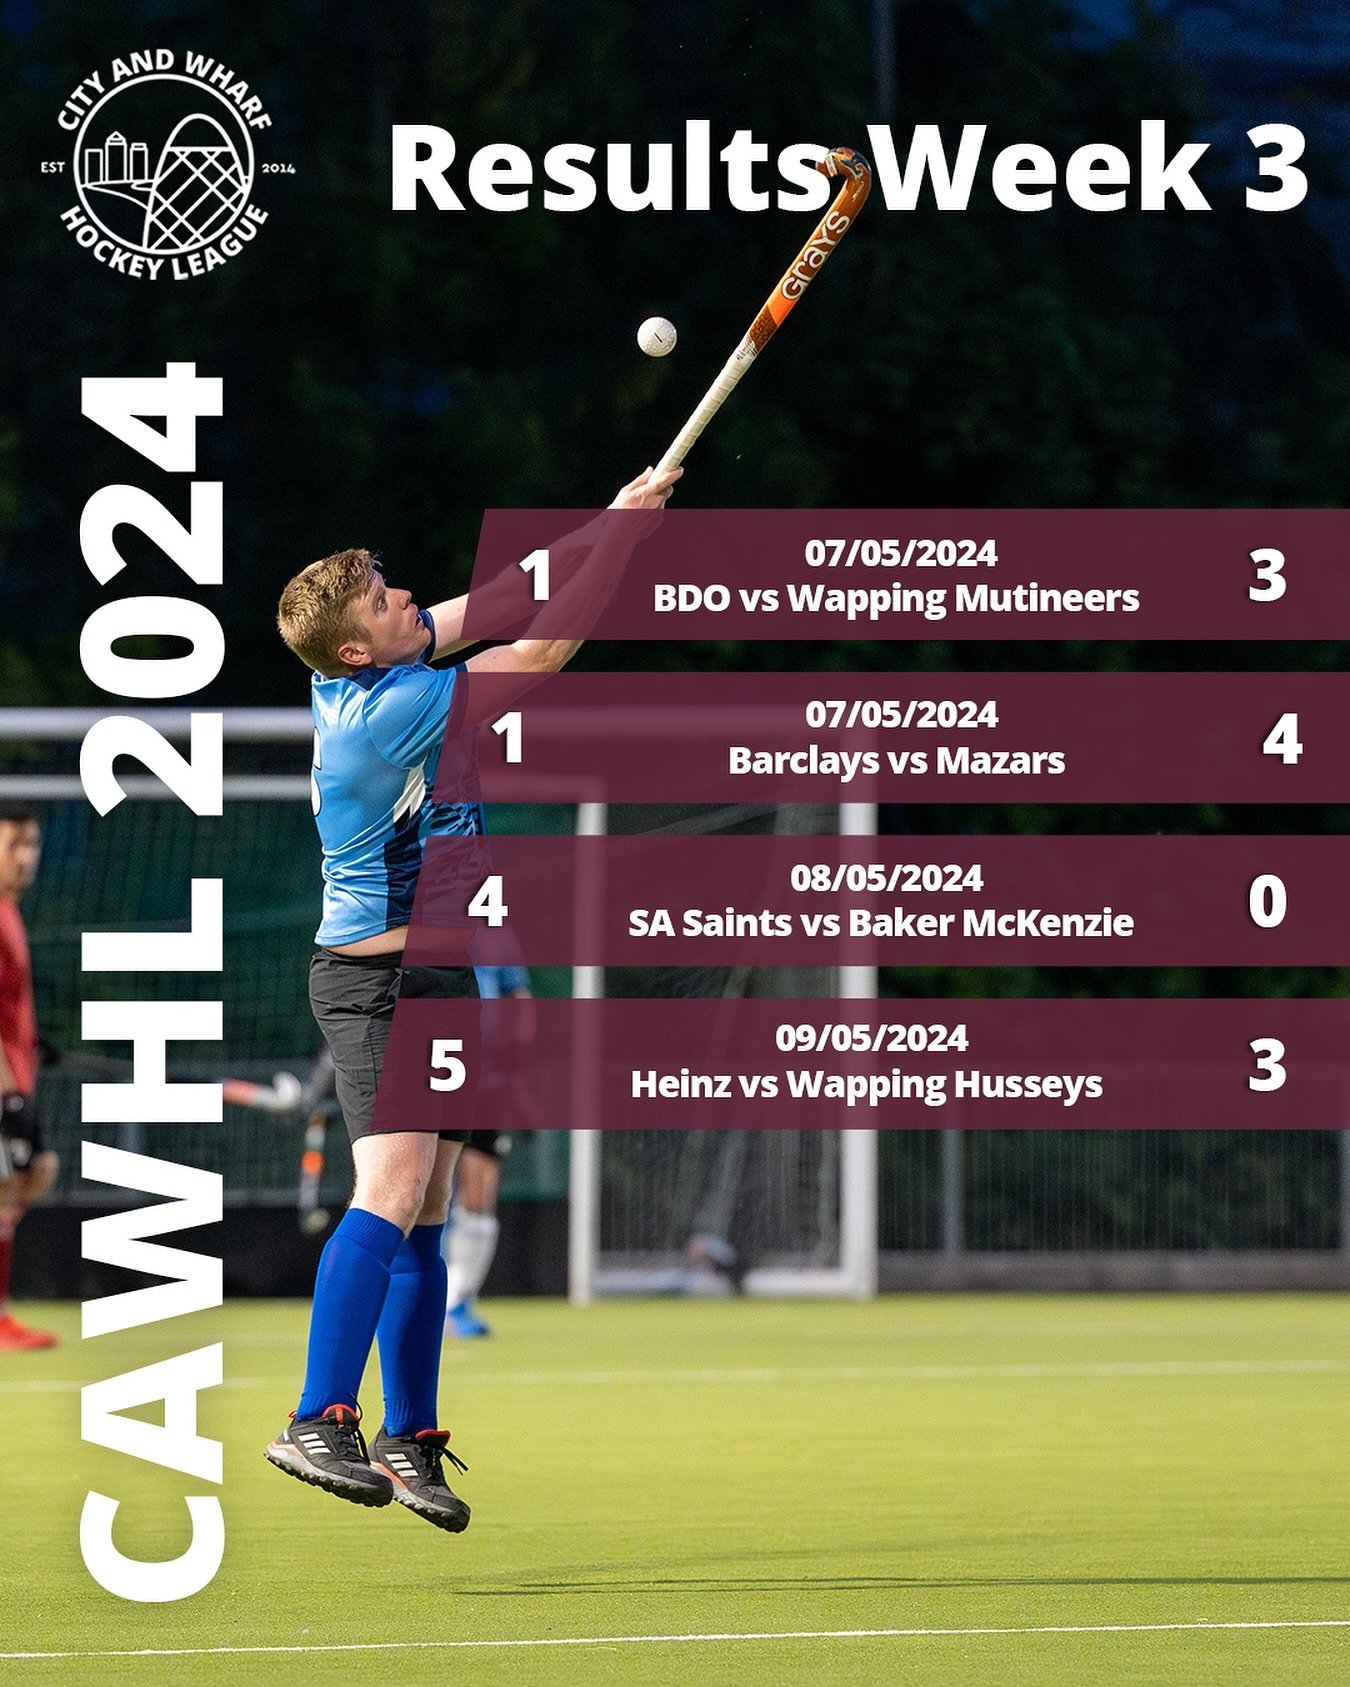 Week 3 Results 🏑

A fairly tame set of fixtures this week saw us play in some proper summer league weather 🌇

Next week will see almost double the fixtures as we head closer to deciding league placements 👀

#fieldhockey #hockey #citywharfhockey #l